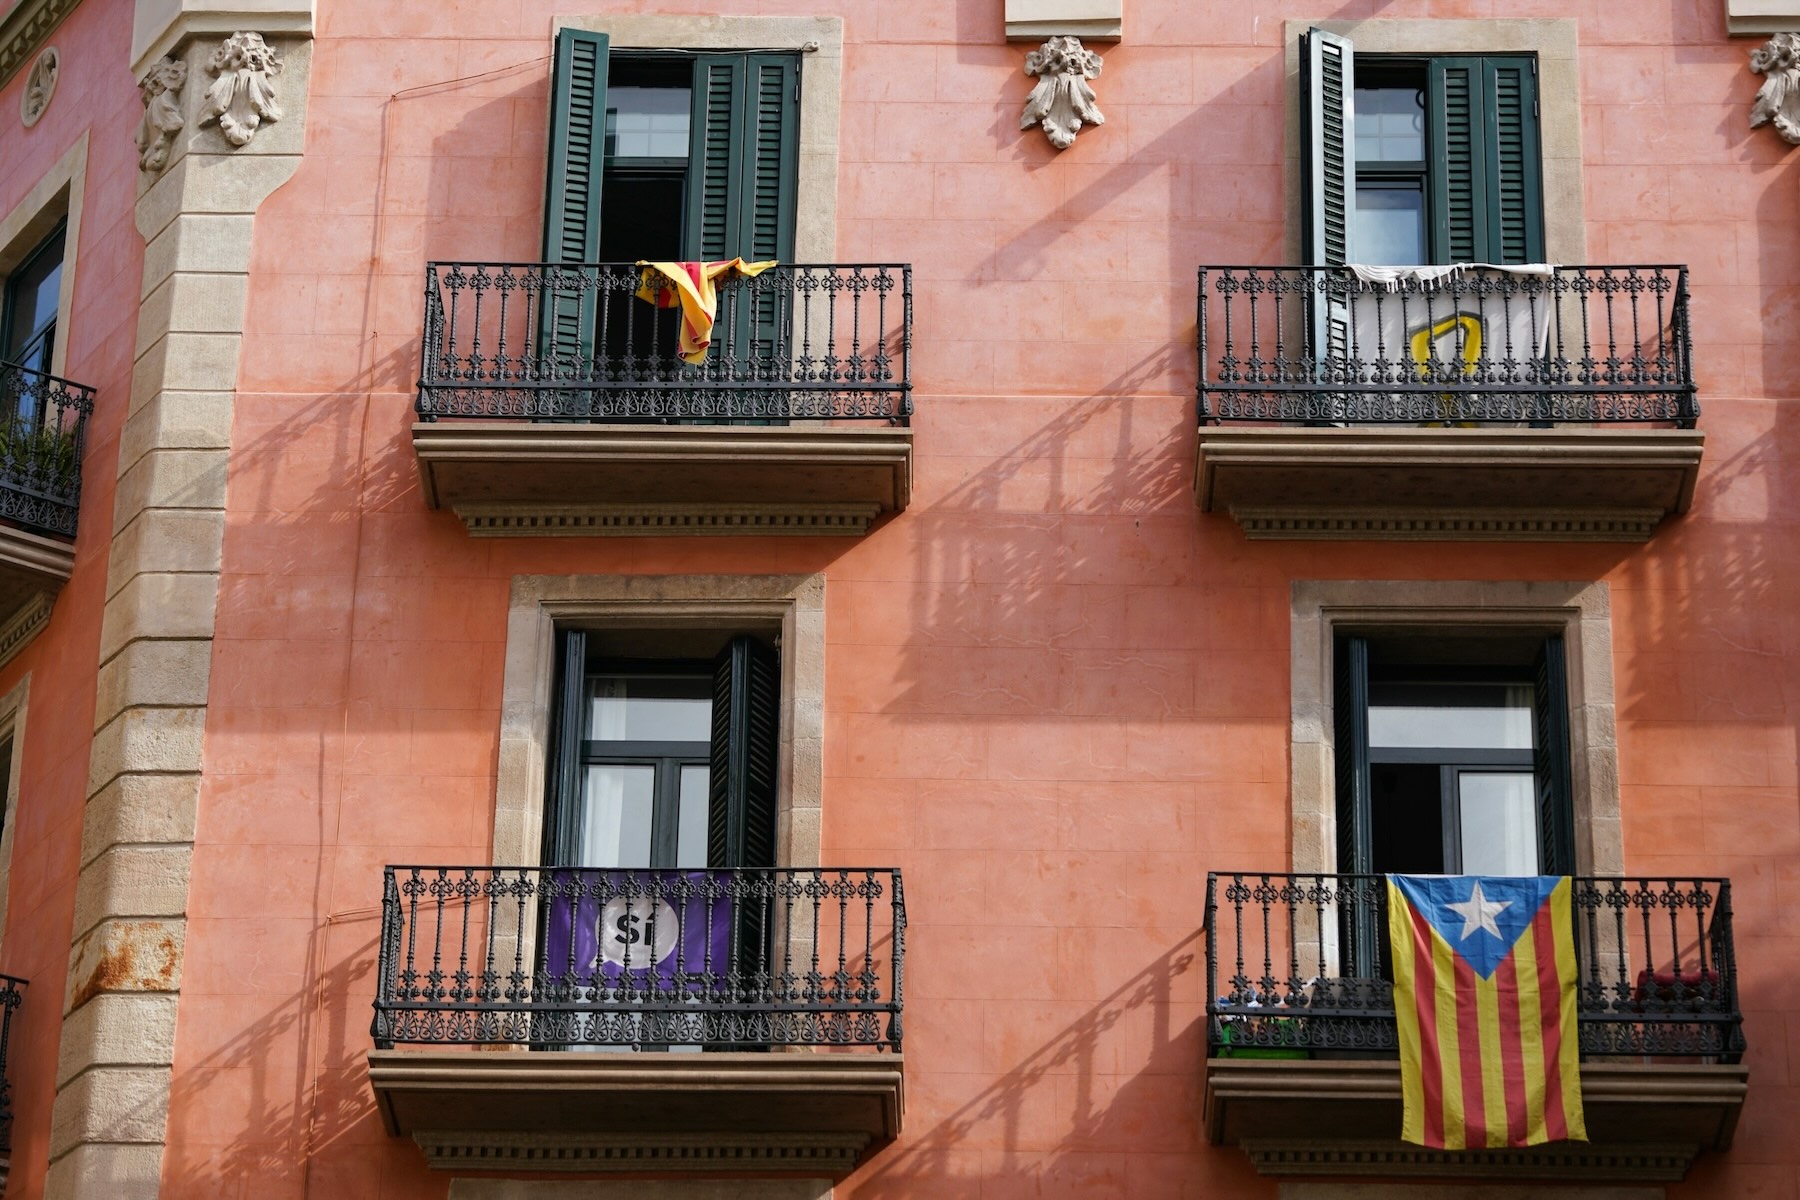 The exterior of a Spanish apartment building with balconies and open windows